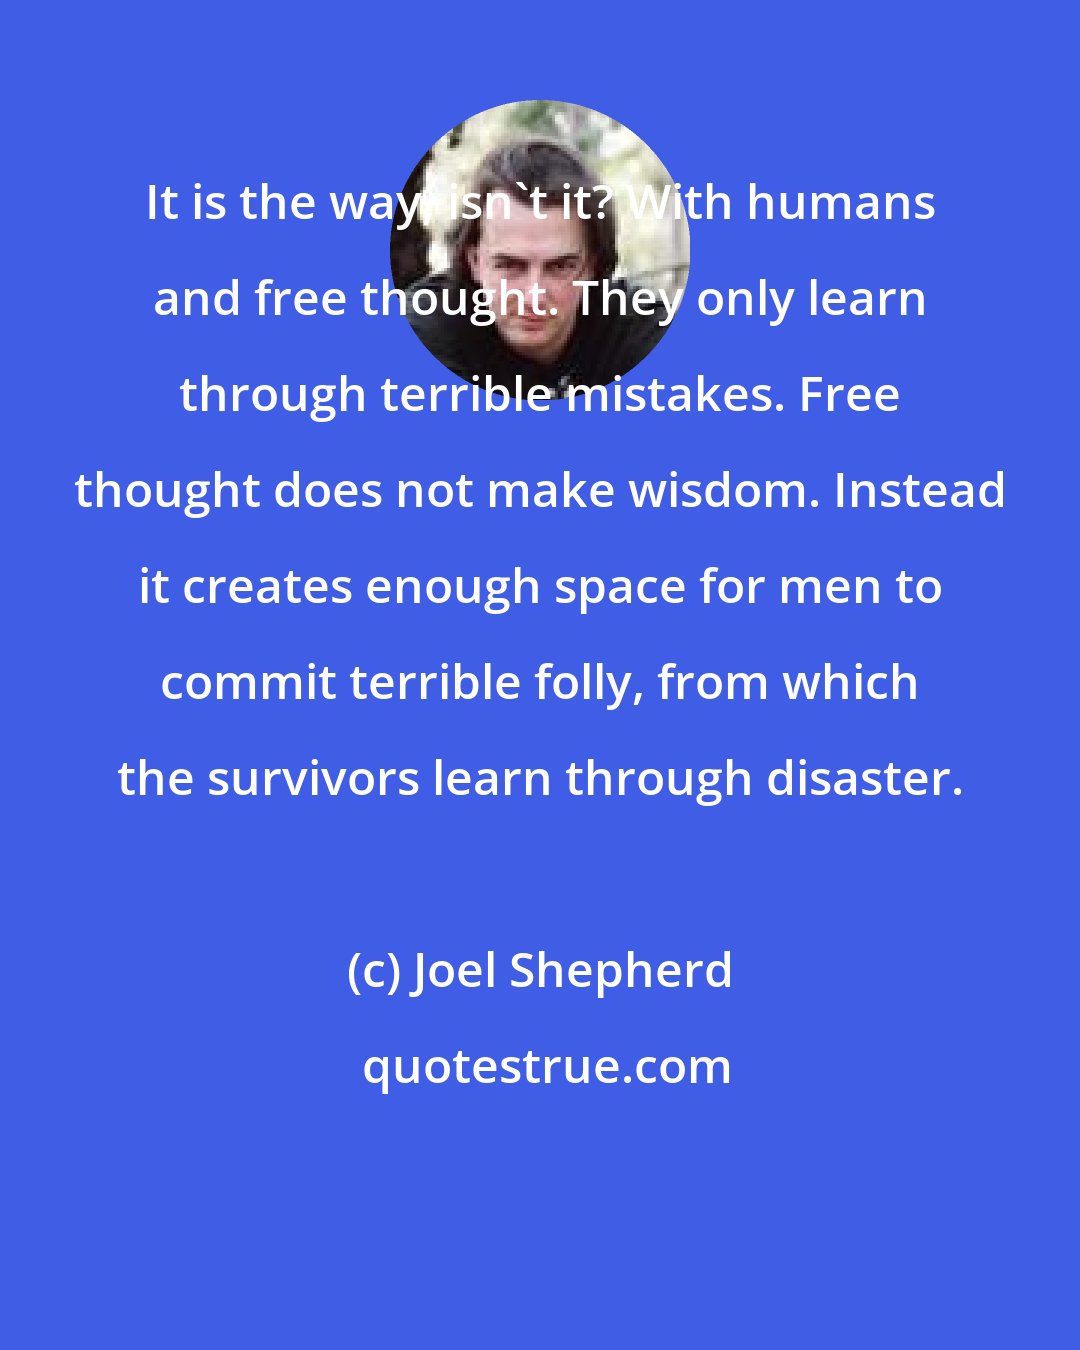 Joel Shepherd: It is the way, isn't it? With humans and free thought. They only learn through terrible mistakes. Free thought does not make wisdom. Instead it creates enough space for men to commit terrible folly, from which the survivors learn through disaster.